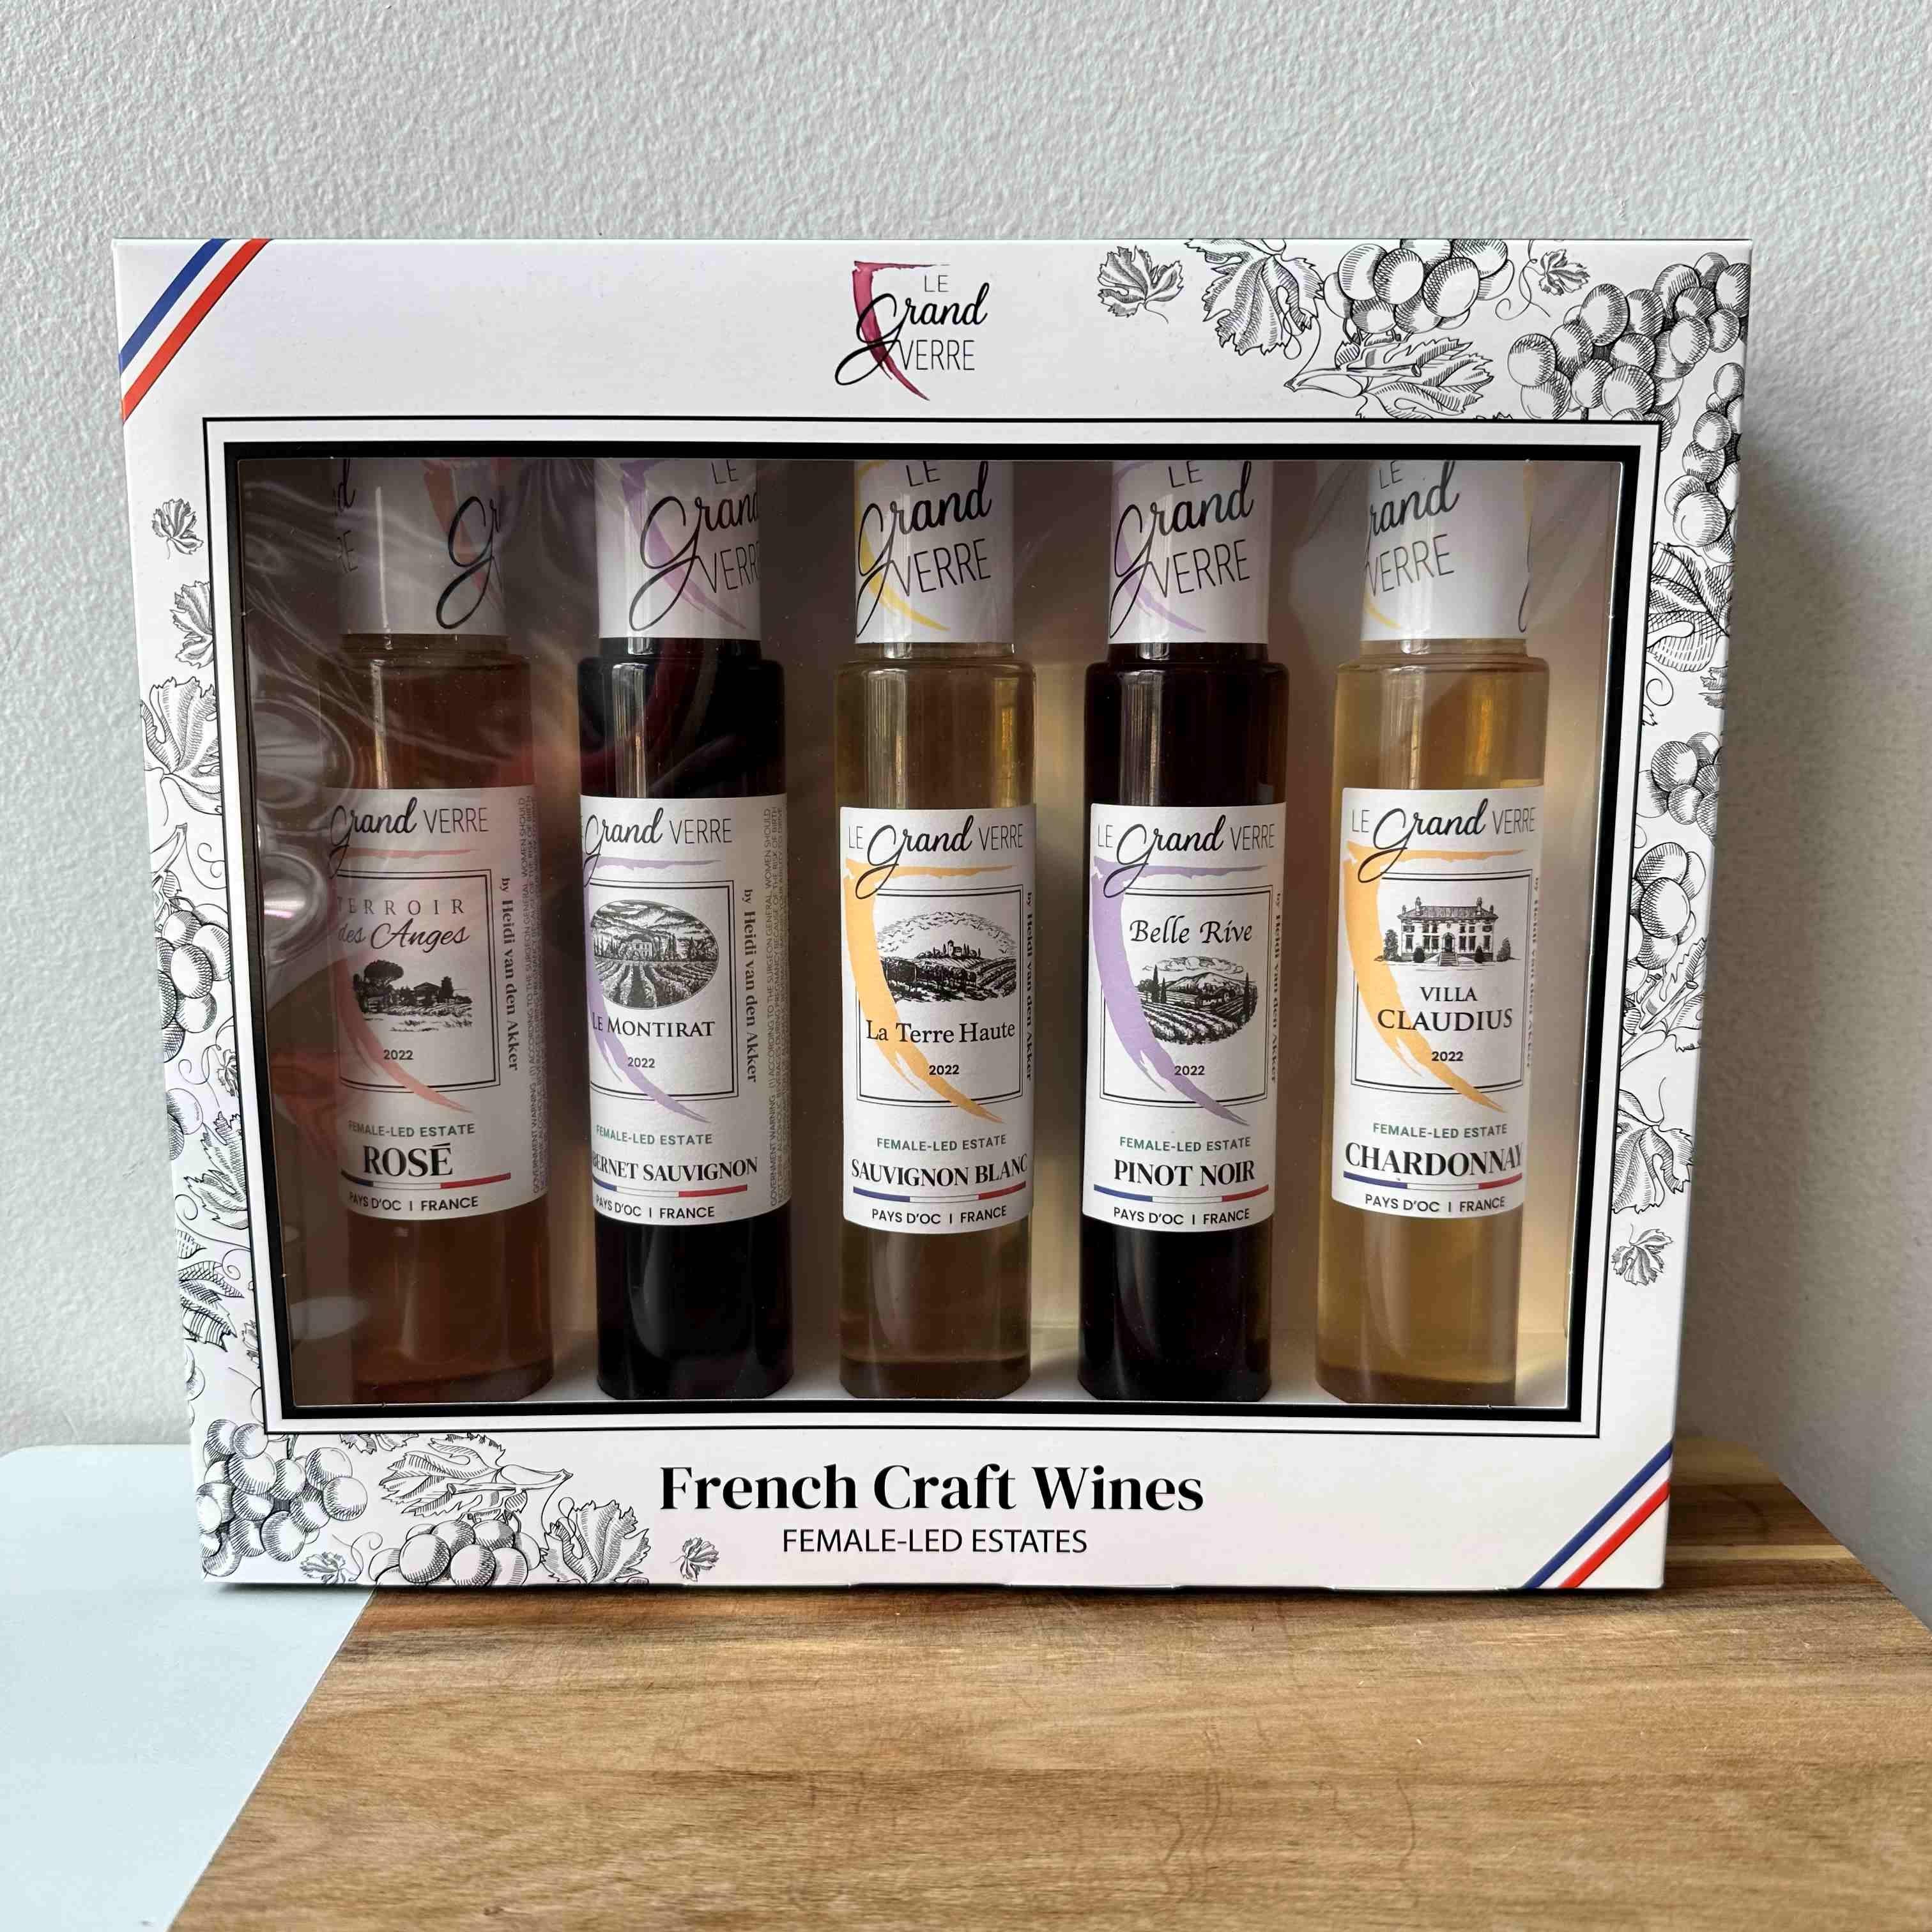 Le Grand Verre French Craft Wines Tasting Kit